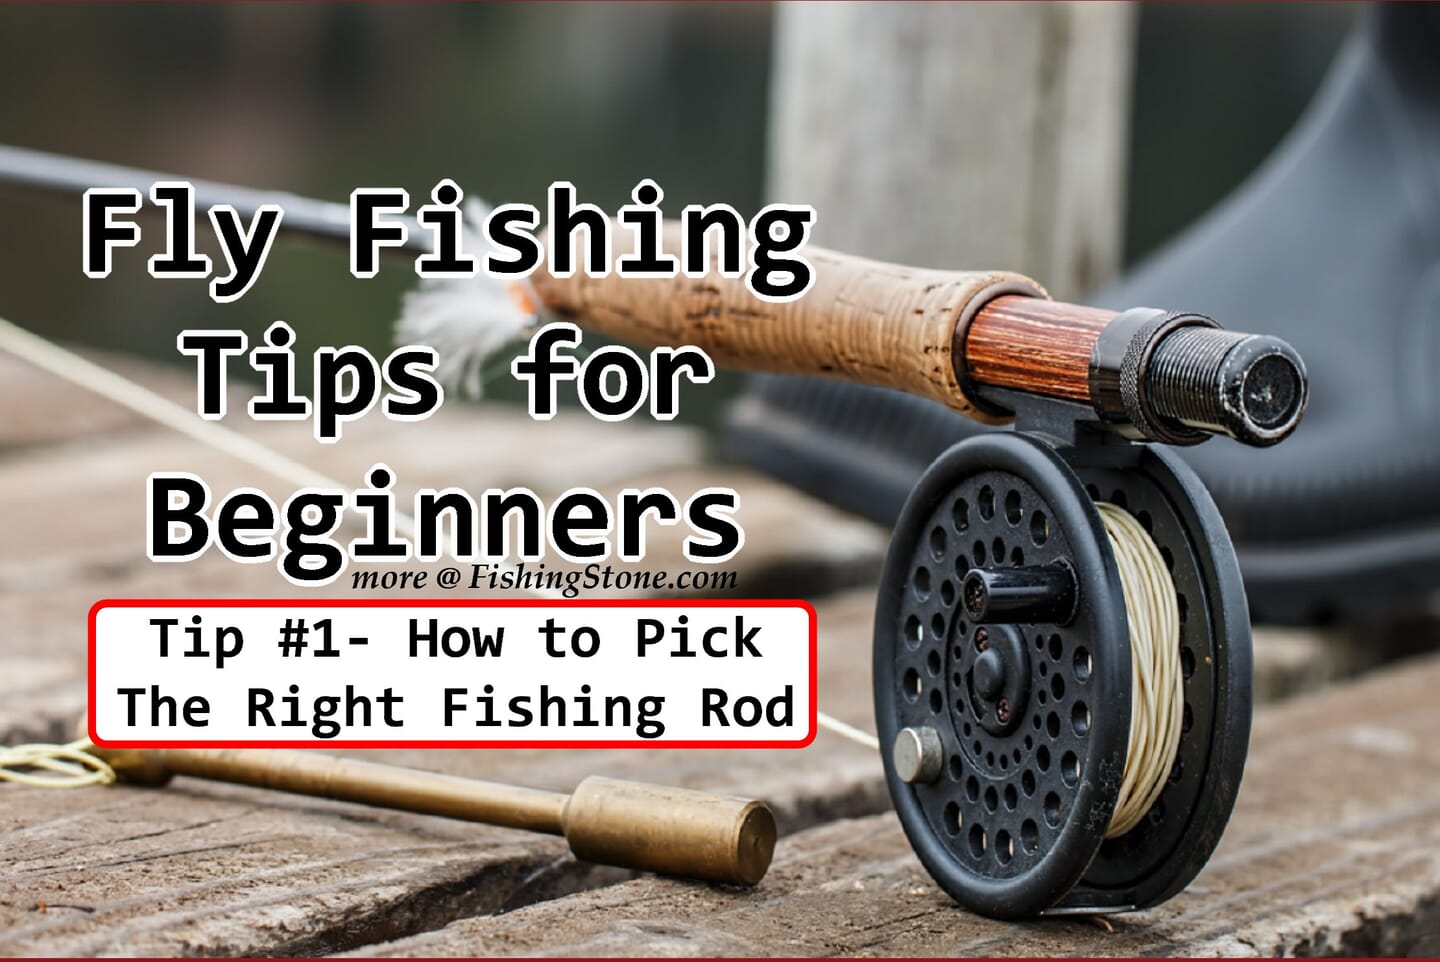 Fly Fishing Tips for Beginners to Catch the Big Fish